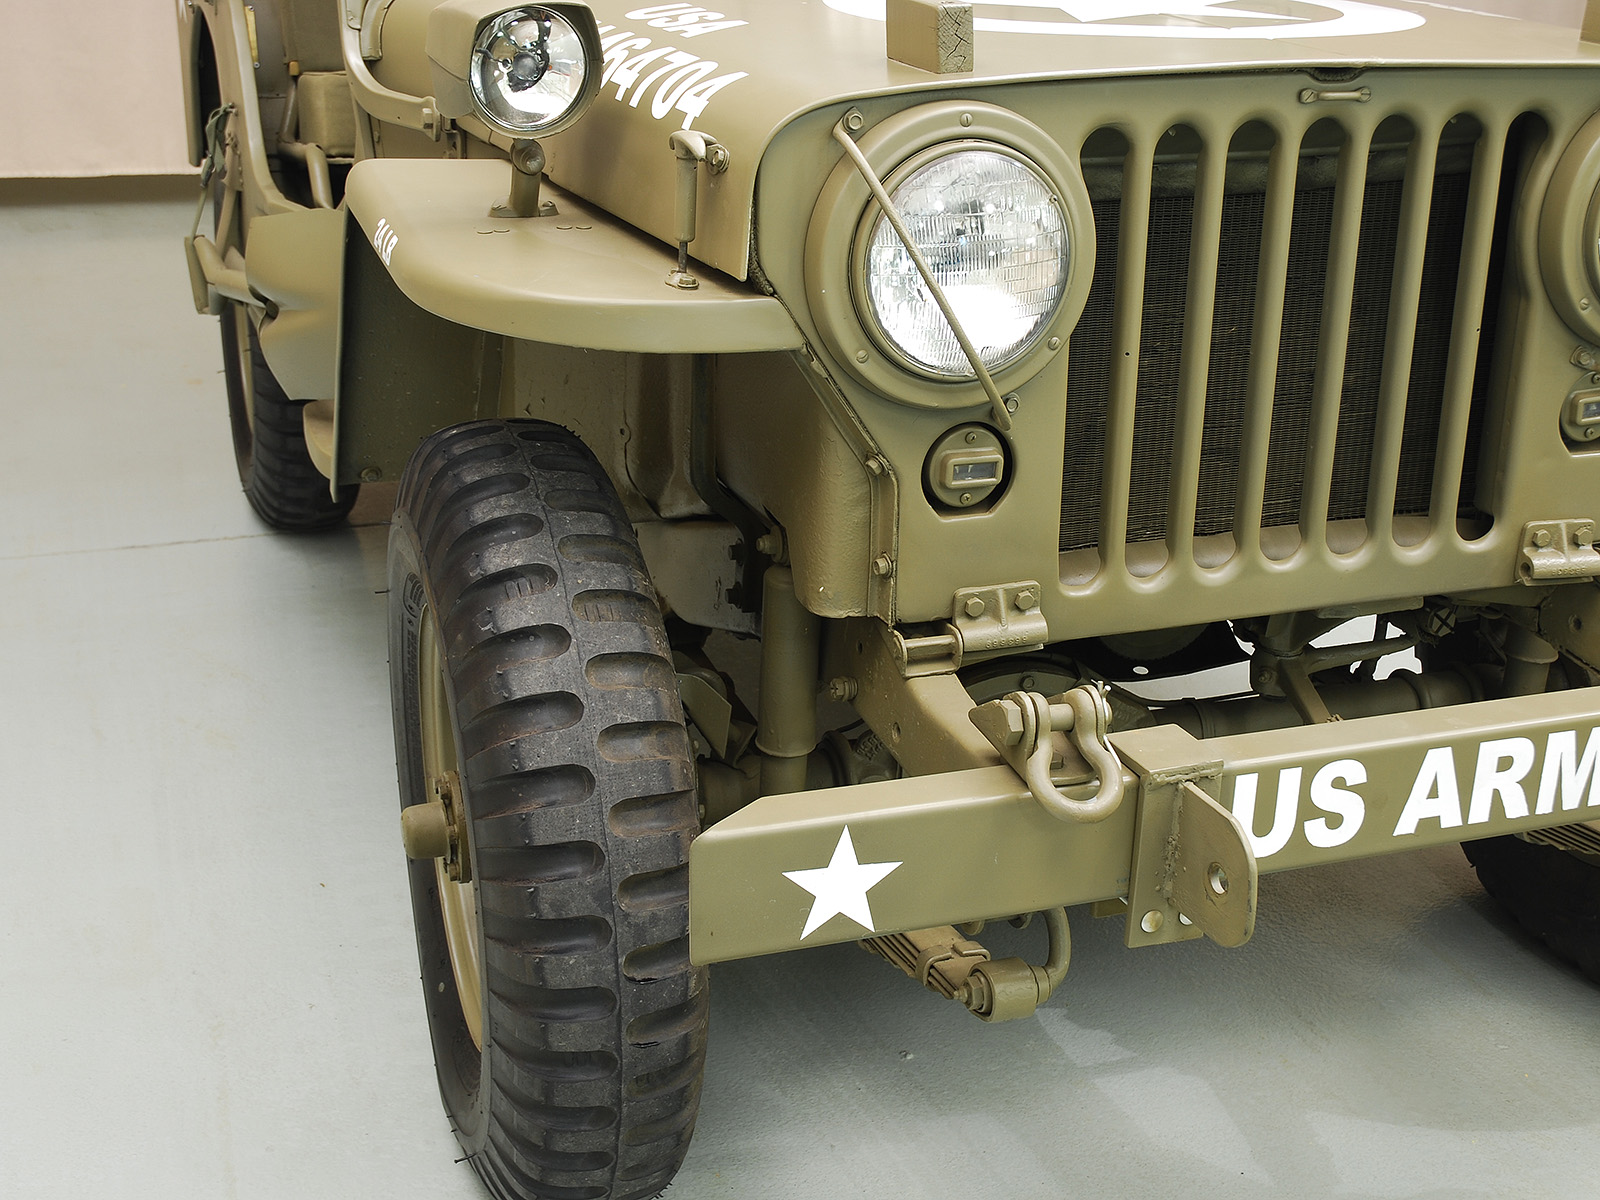 1959 willys-overland m38a1 1/4 ton